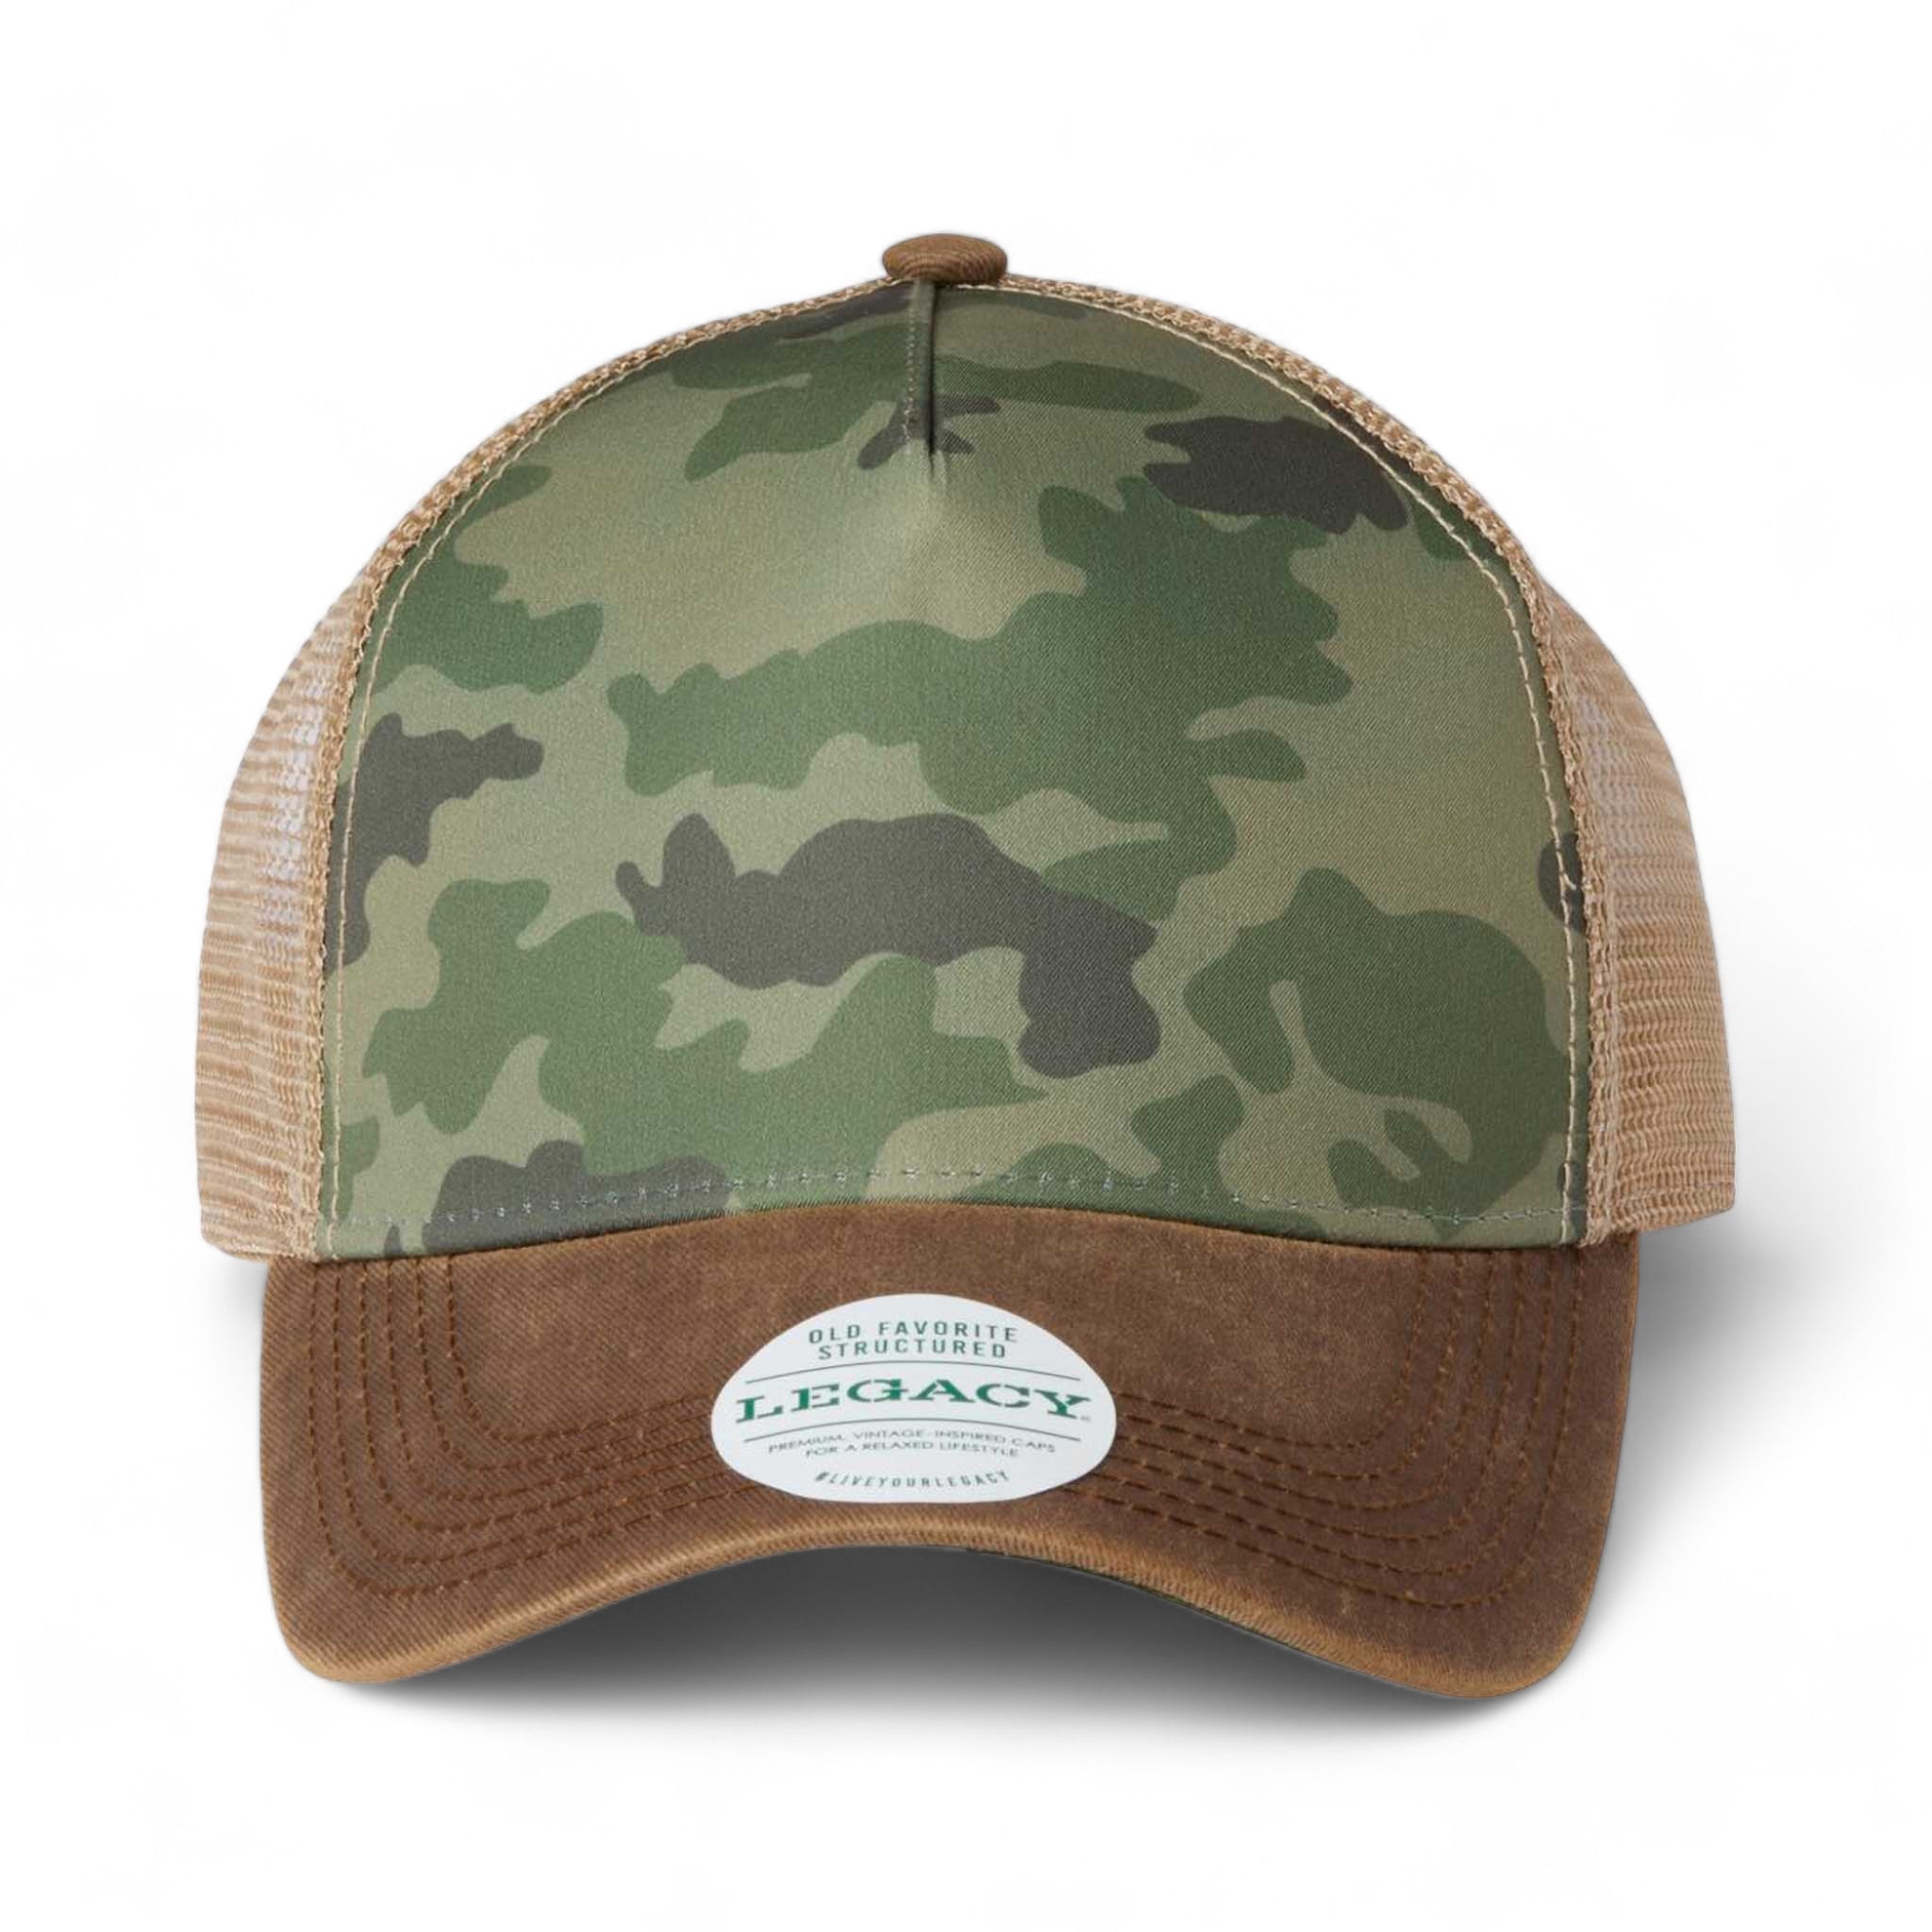 Front view of LEGACY OFAFP custom hat in army camo, brown and khaki